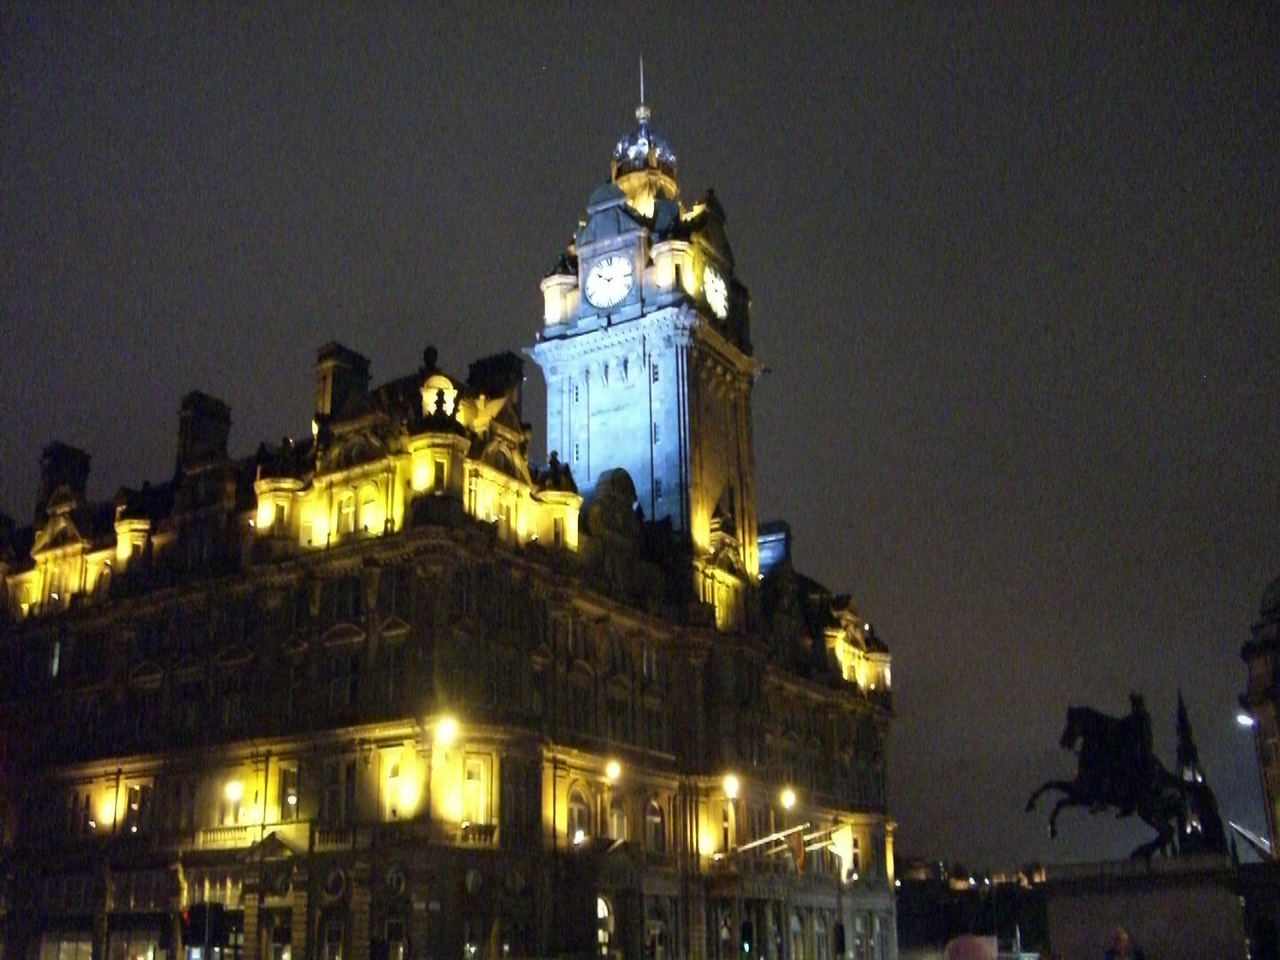 the clock tower is illuminated up at night